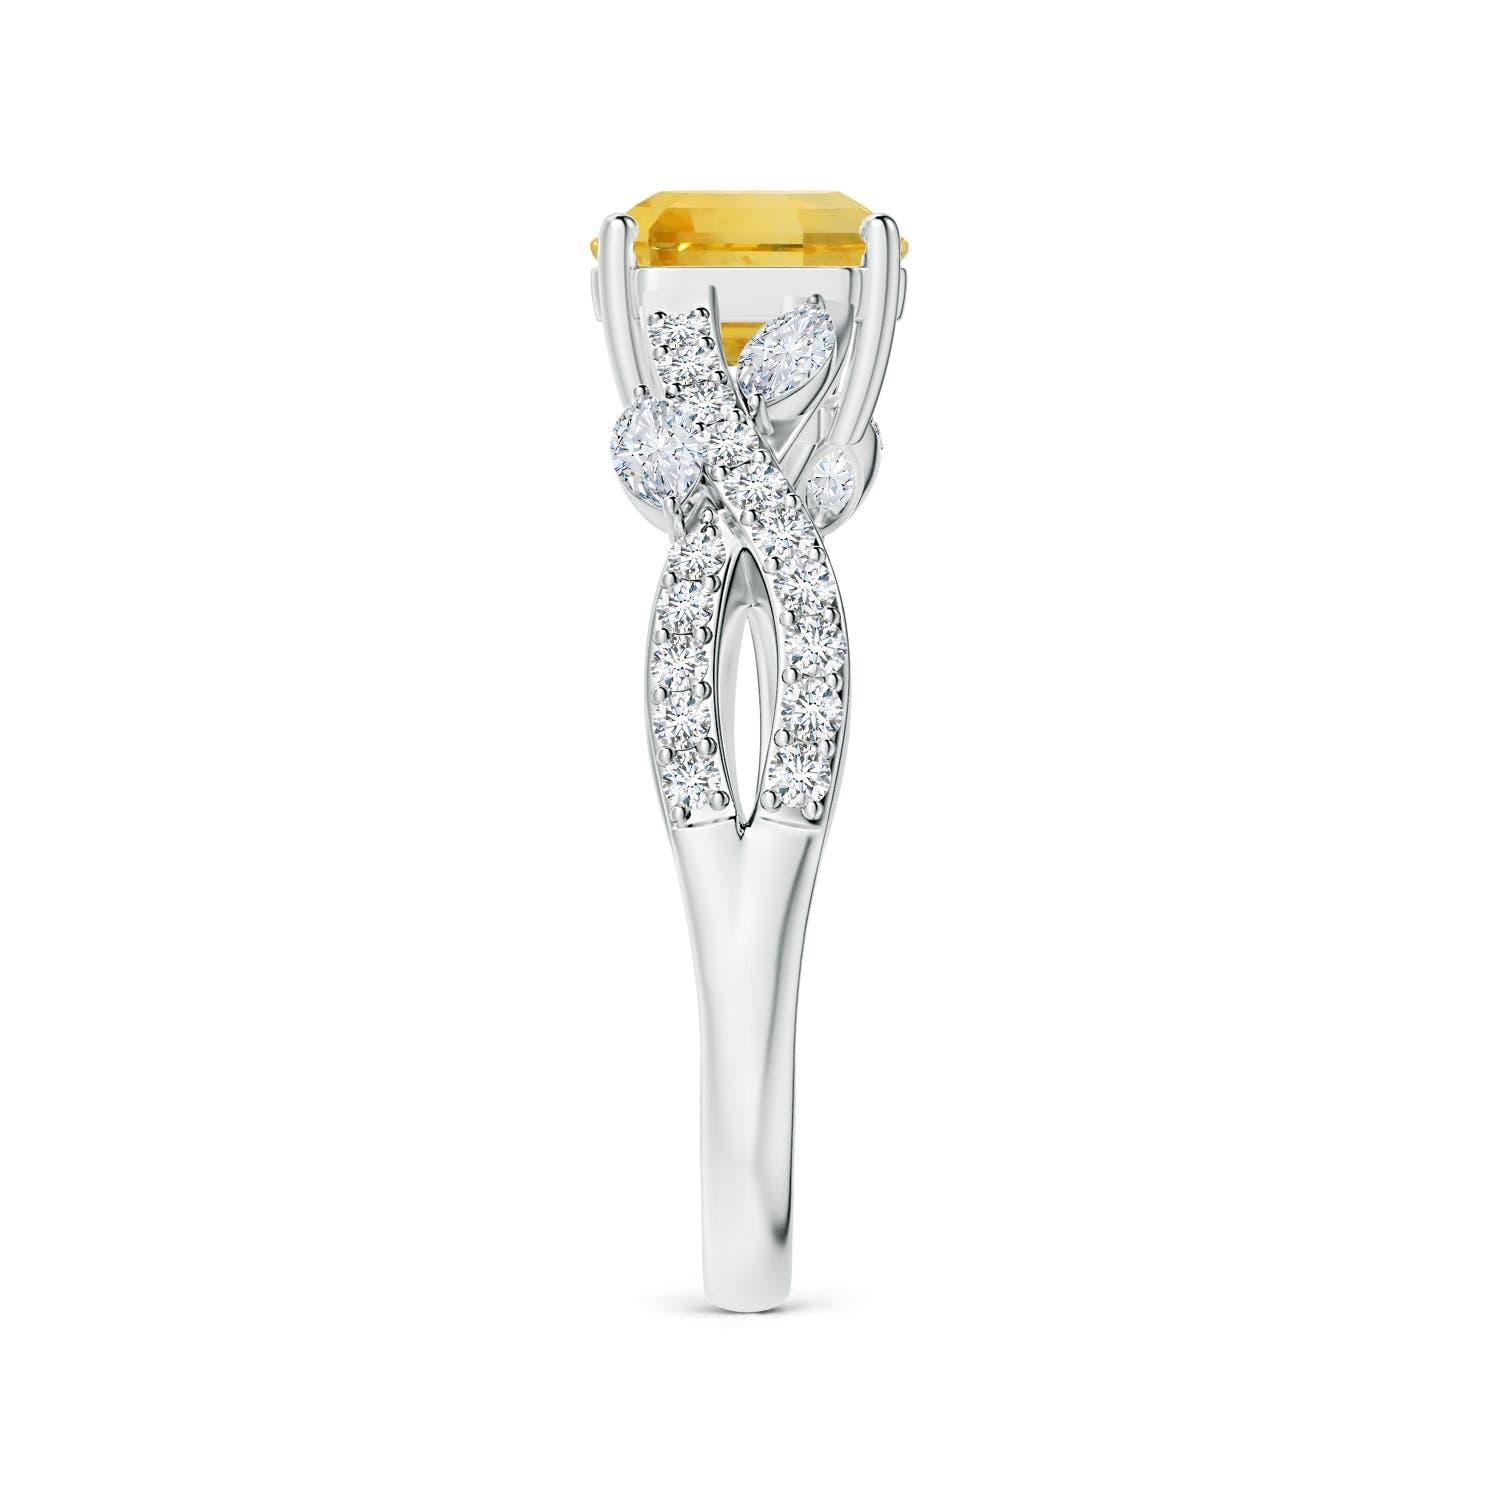 For Sale:  Angara Gia Certified Emerald-Cut Yellow Sapphire Diamond Ring in White Gold 4